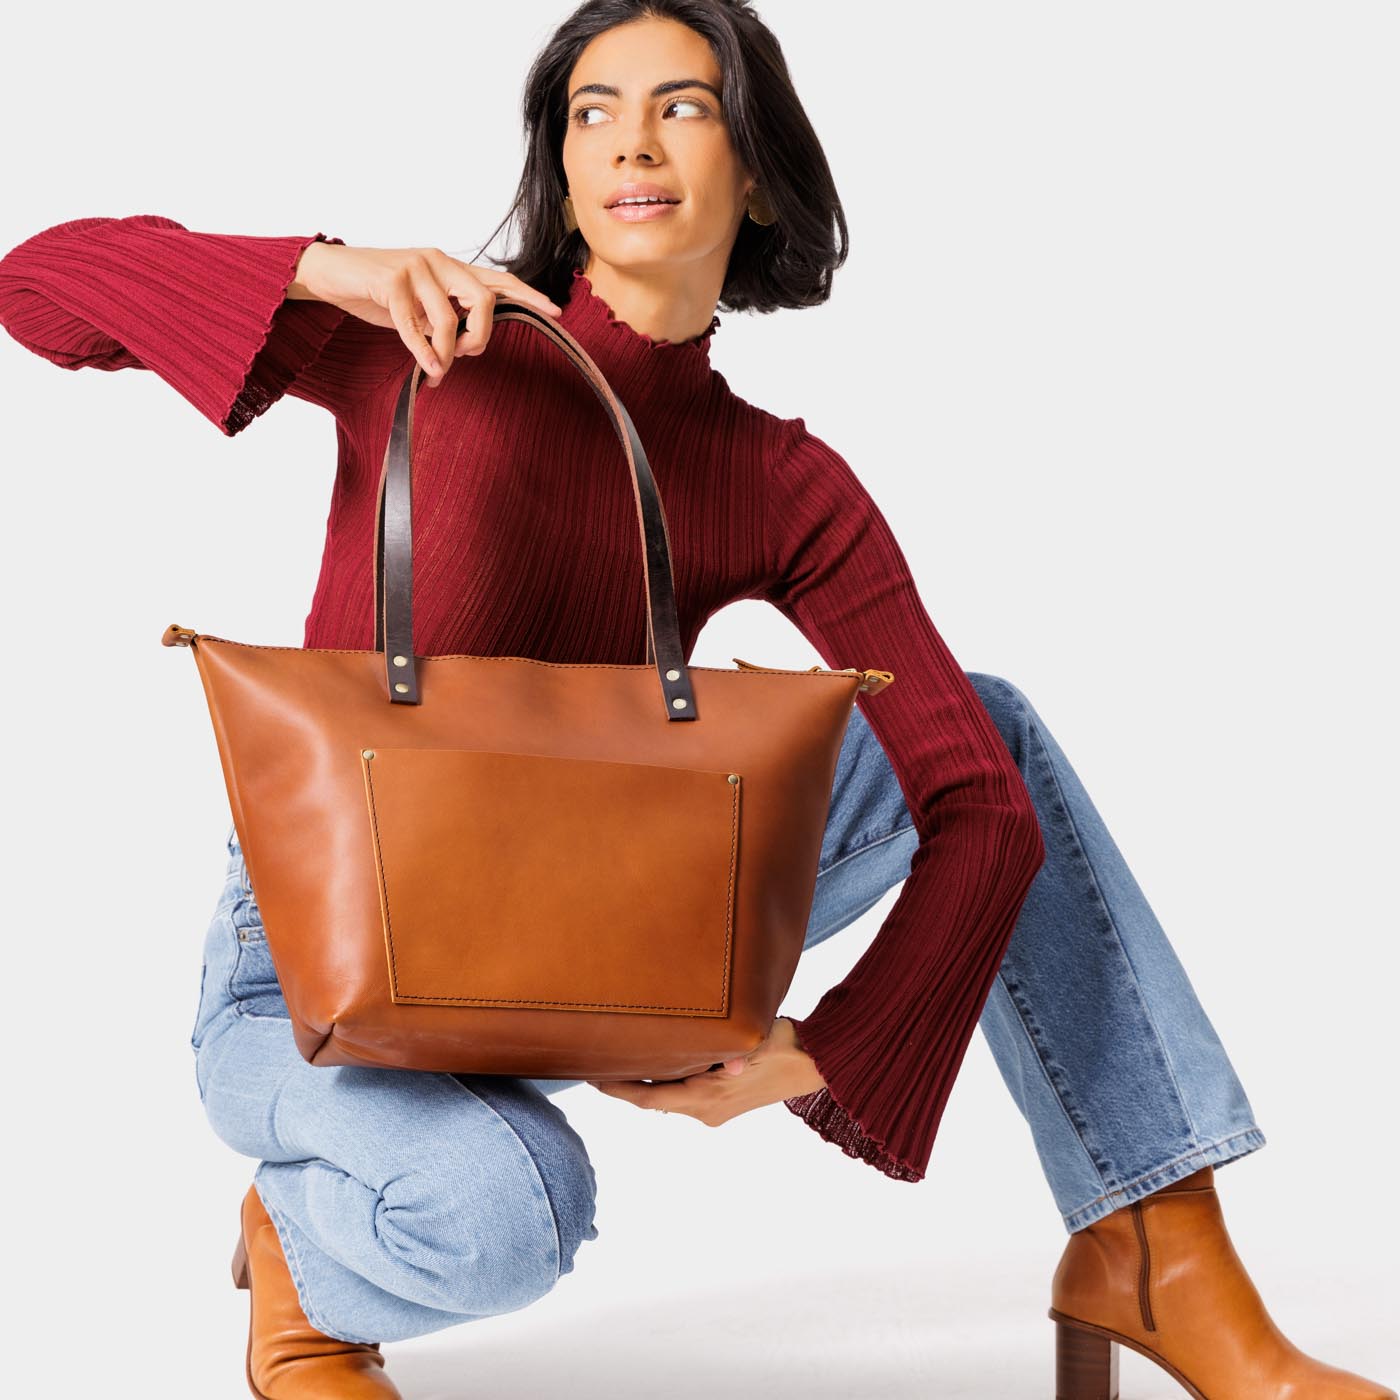 Classic Leather Tote  Portland Leather Goods